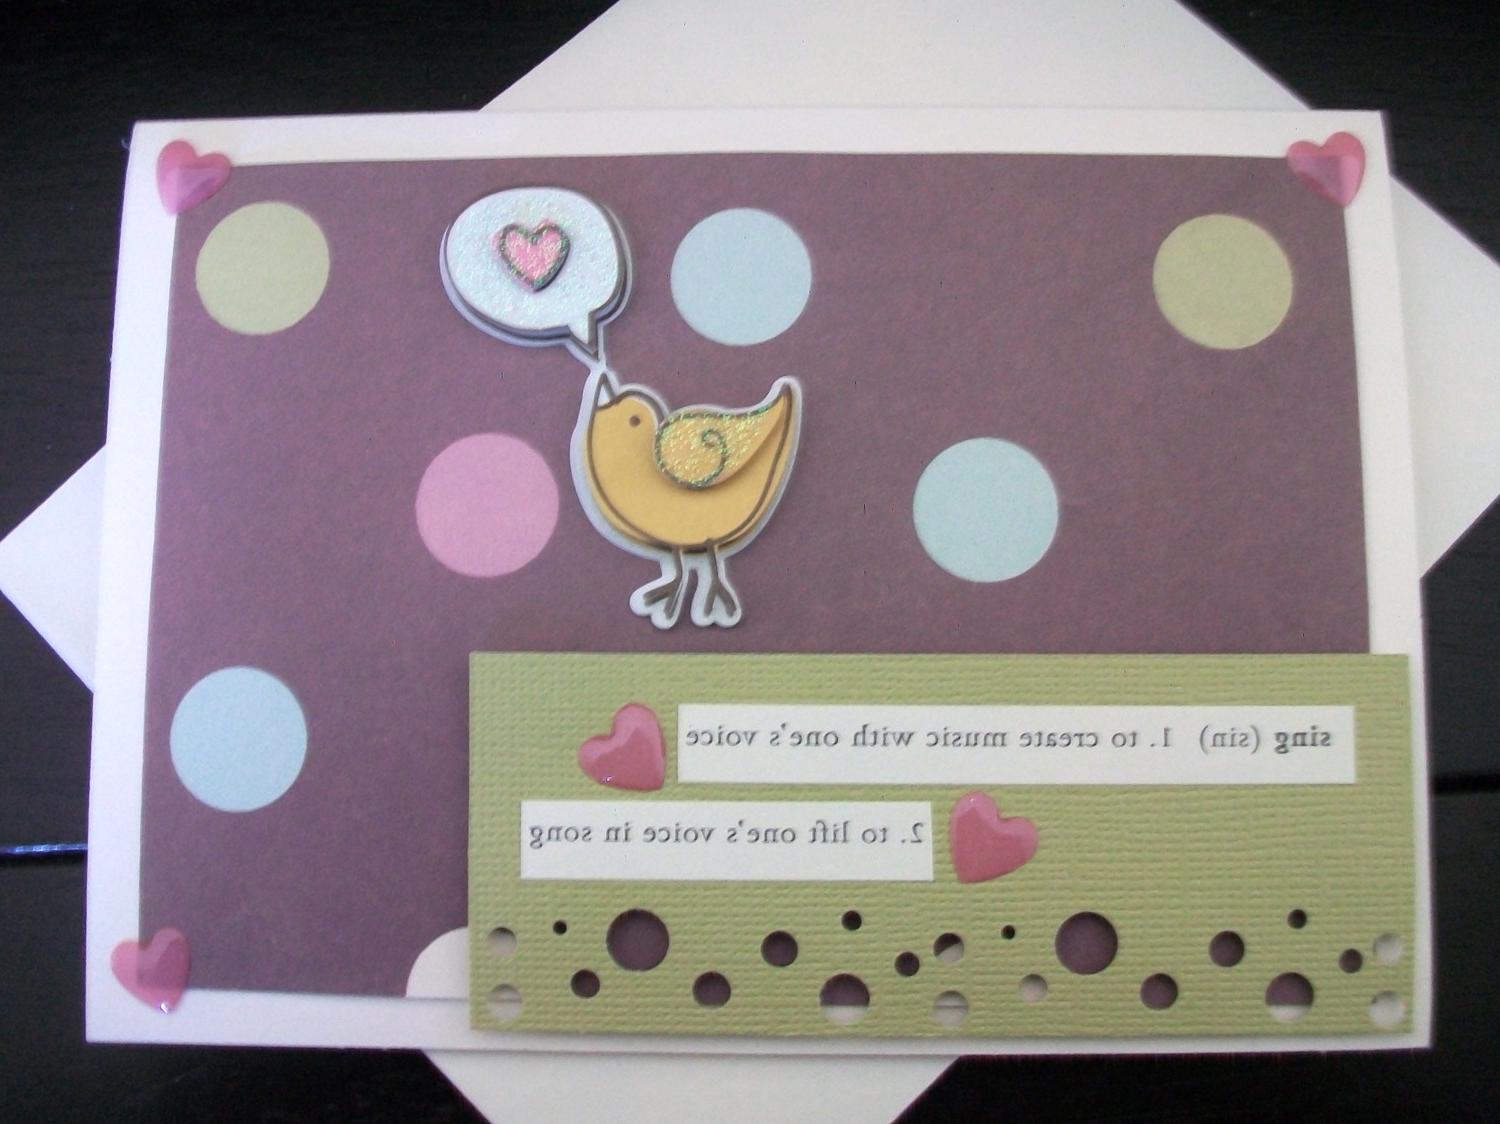 SING Birdie on Olive Pale Blue Mauve Polka Dot. From MeticulousMind